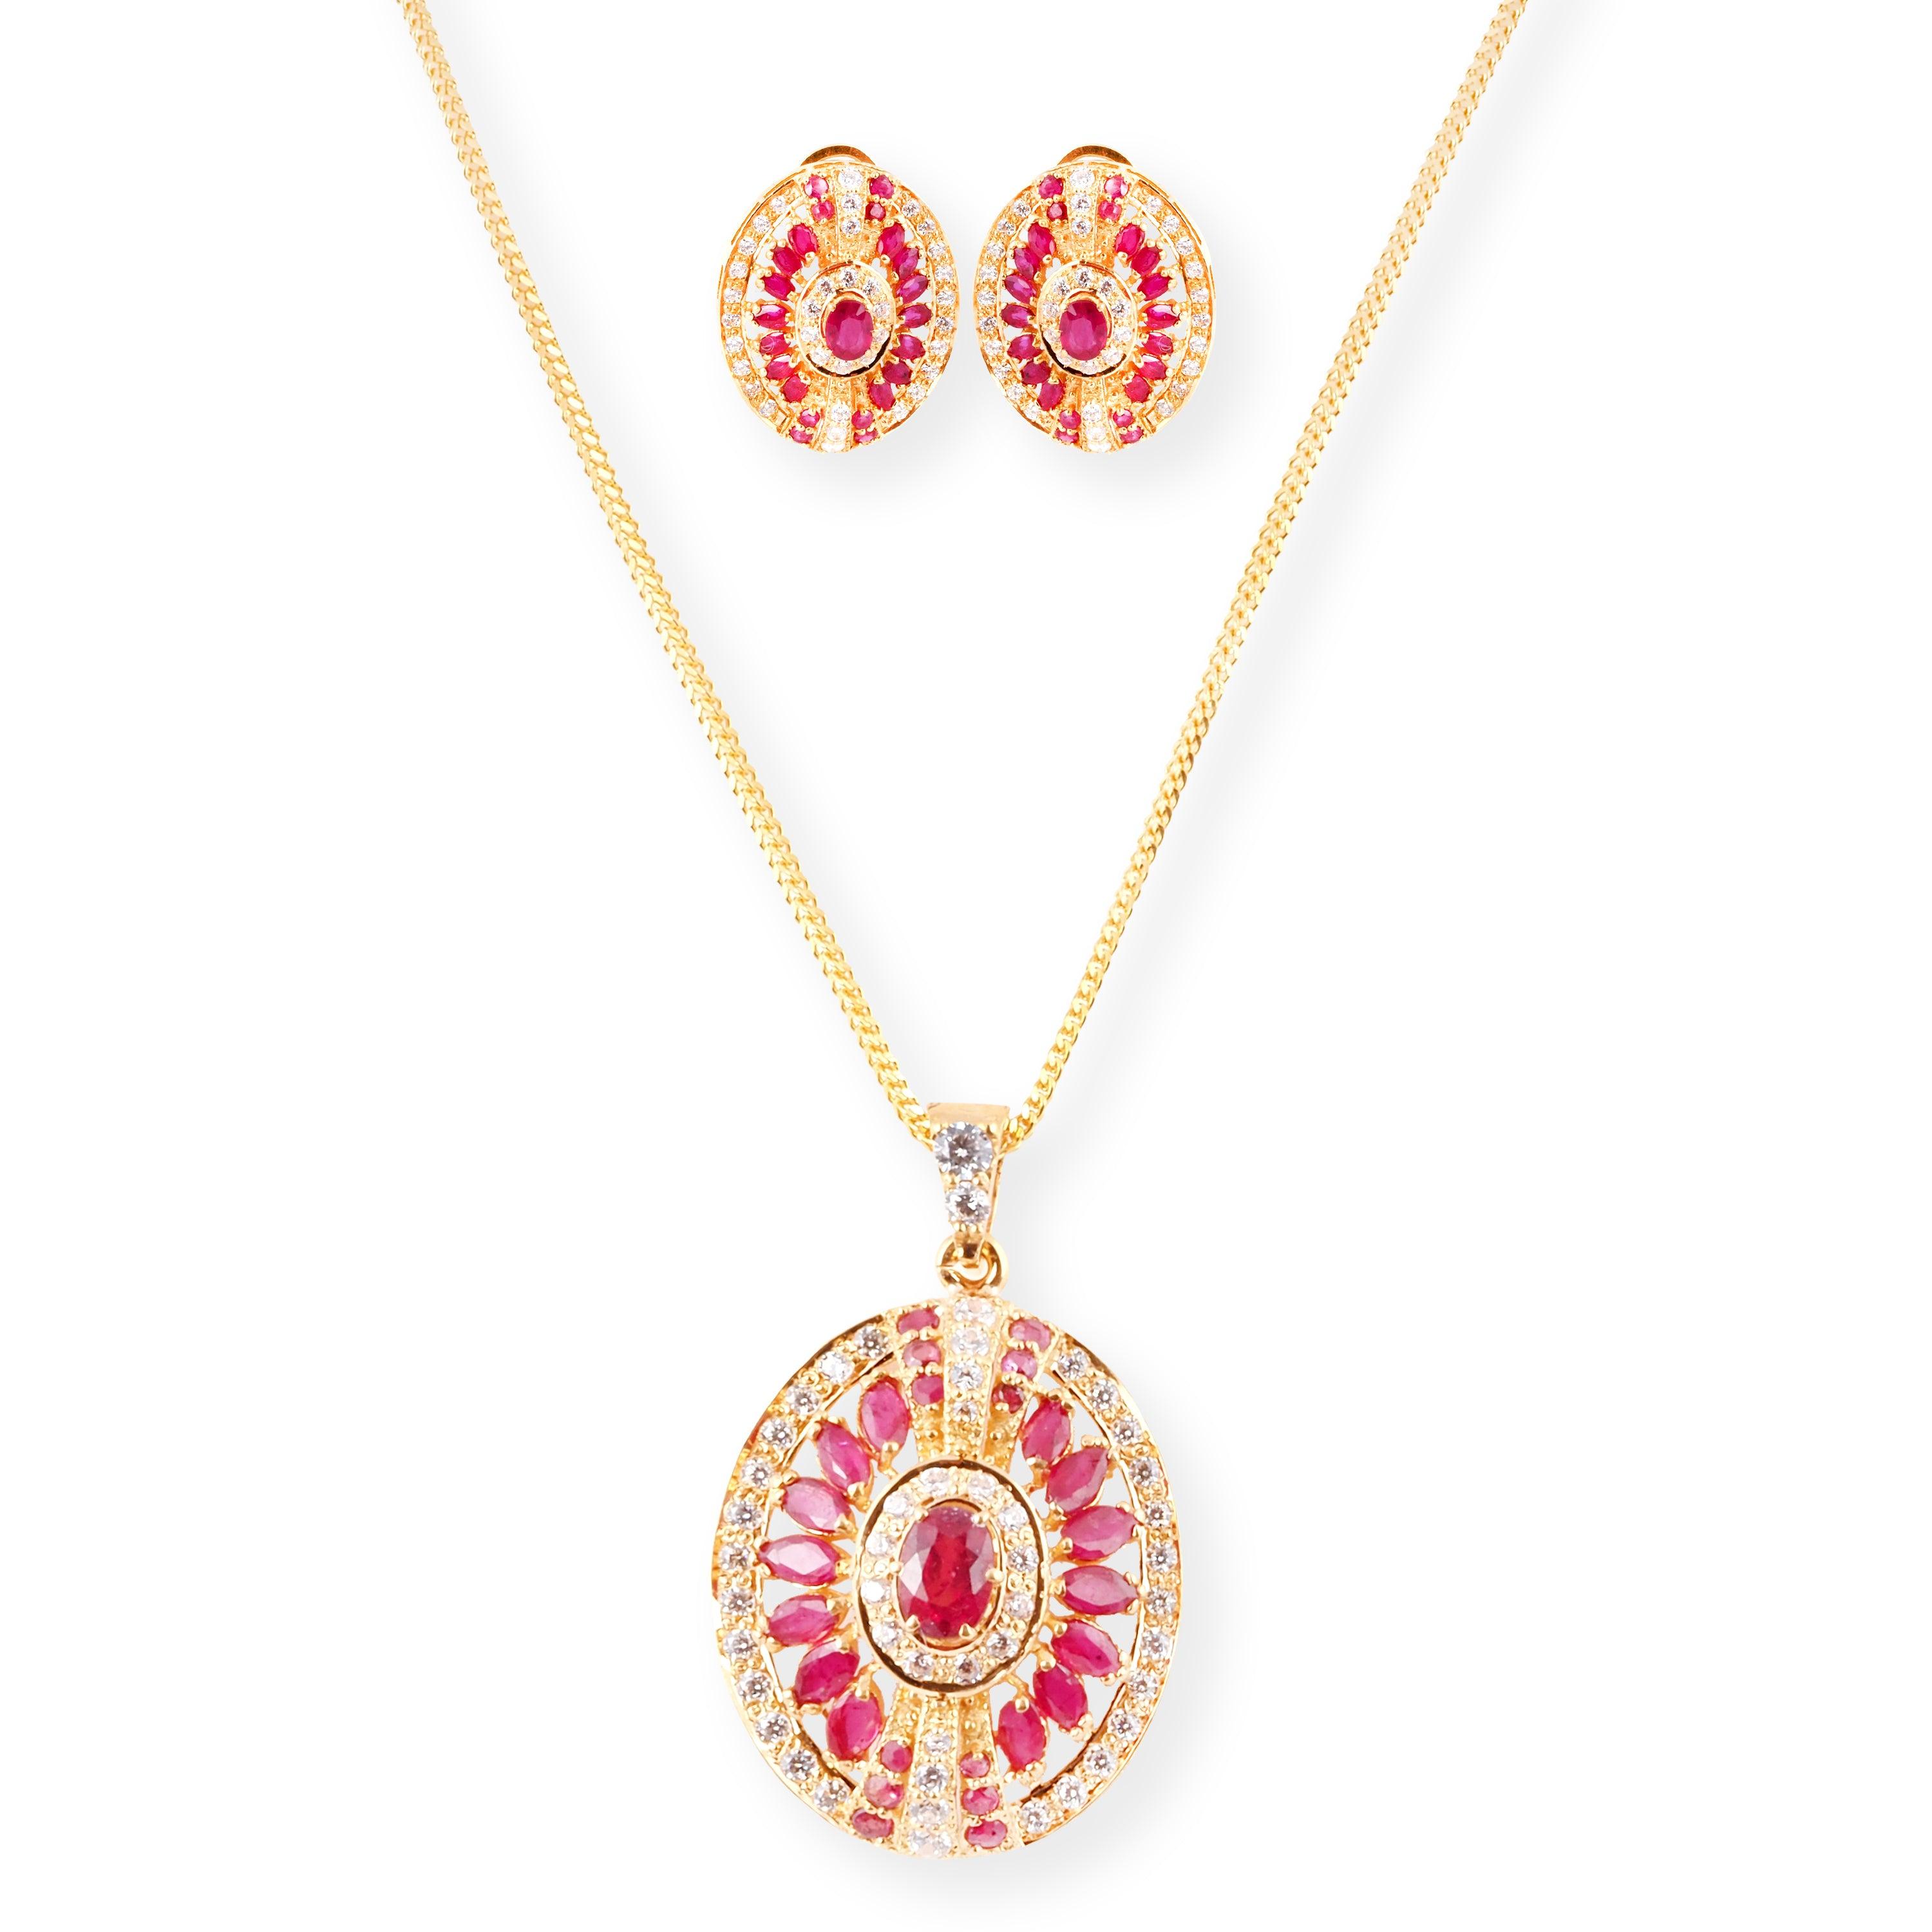 22ct Gold Set with Red & White Cubic Zirconia Stones (Pendant + Chain + Stud Earrings)-8540 - Minar Jewellers